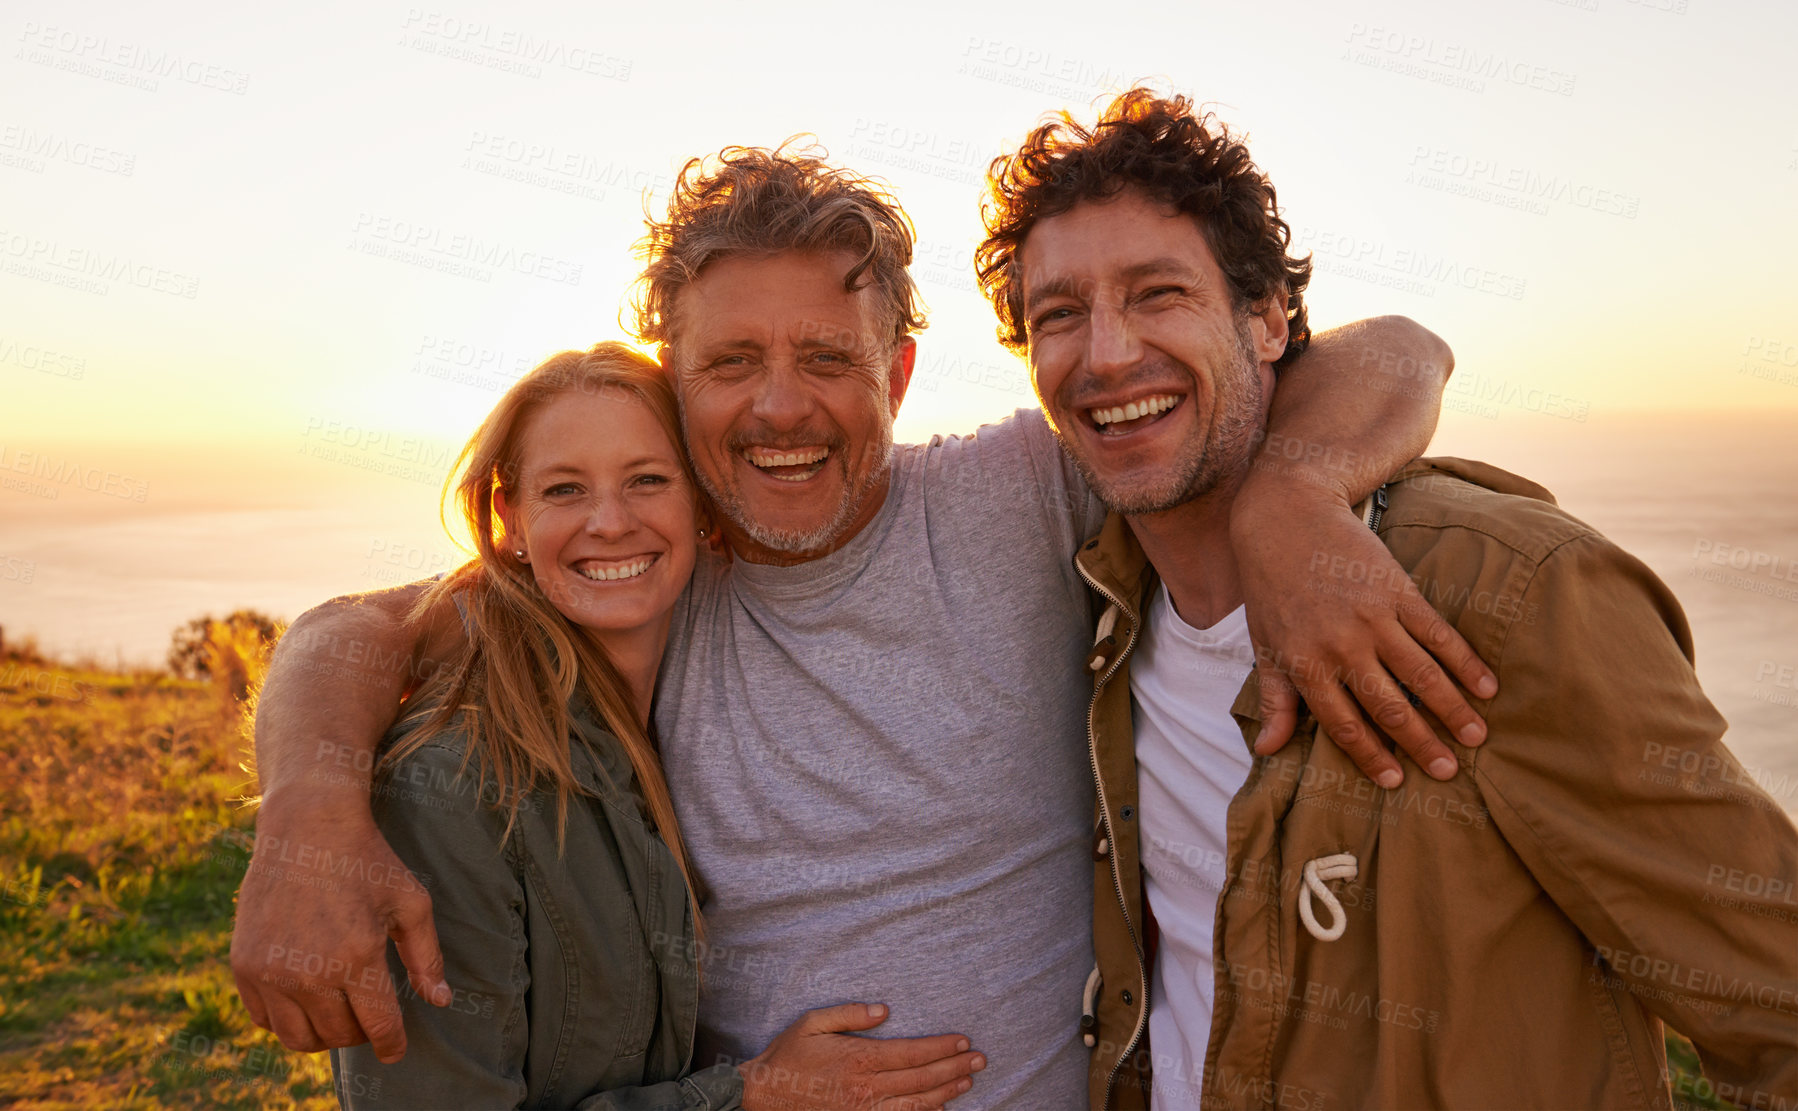 Buy stock photo Portrait of a father with his son and daughter on a grassy hill at sunset